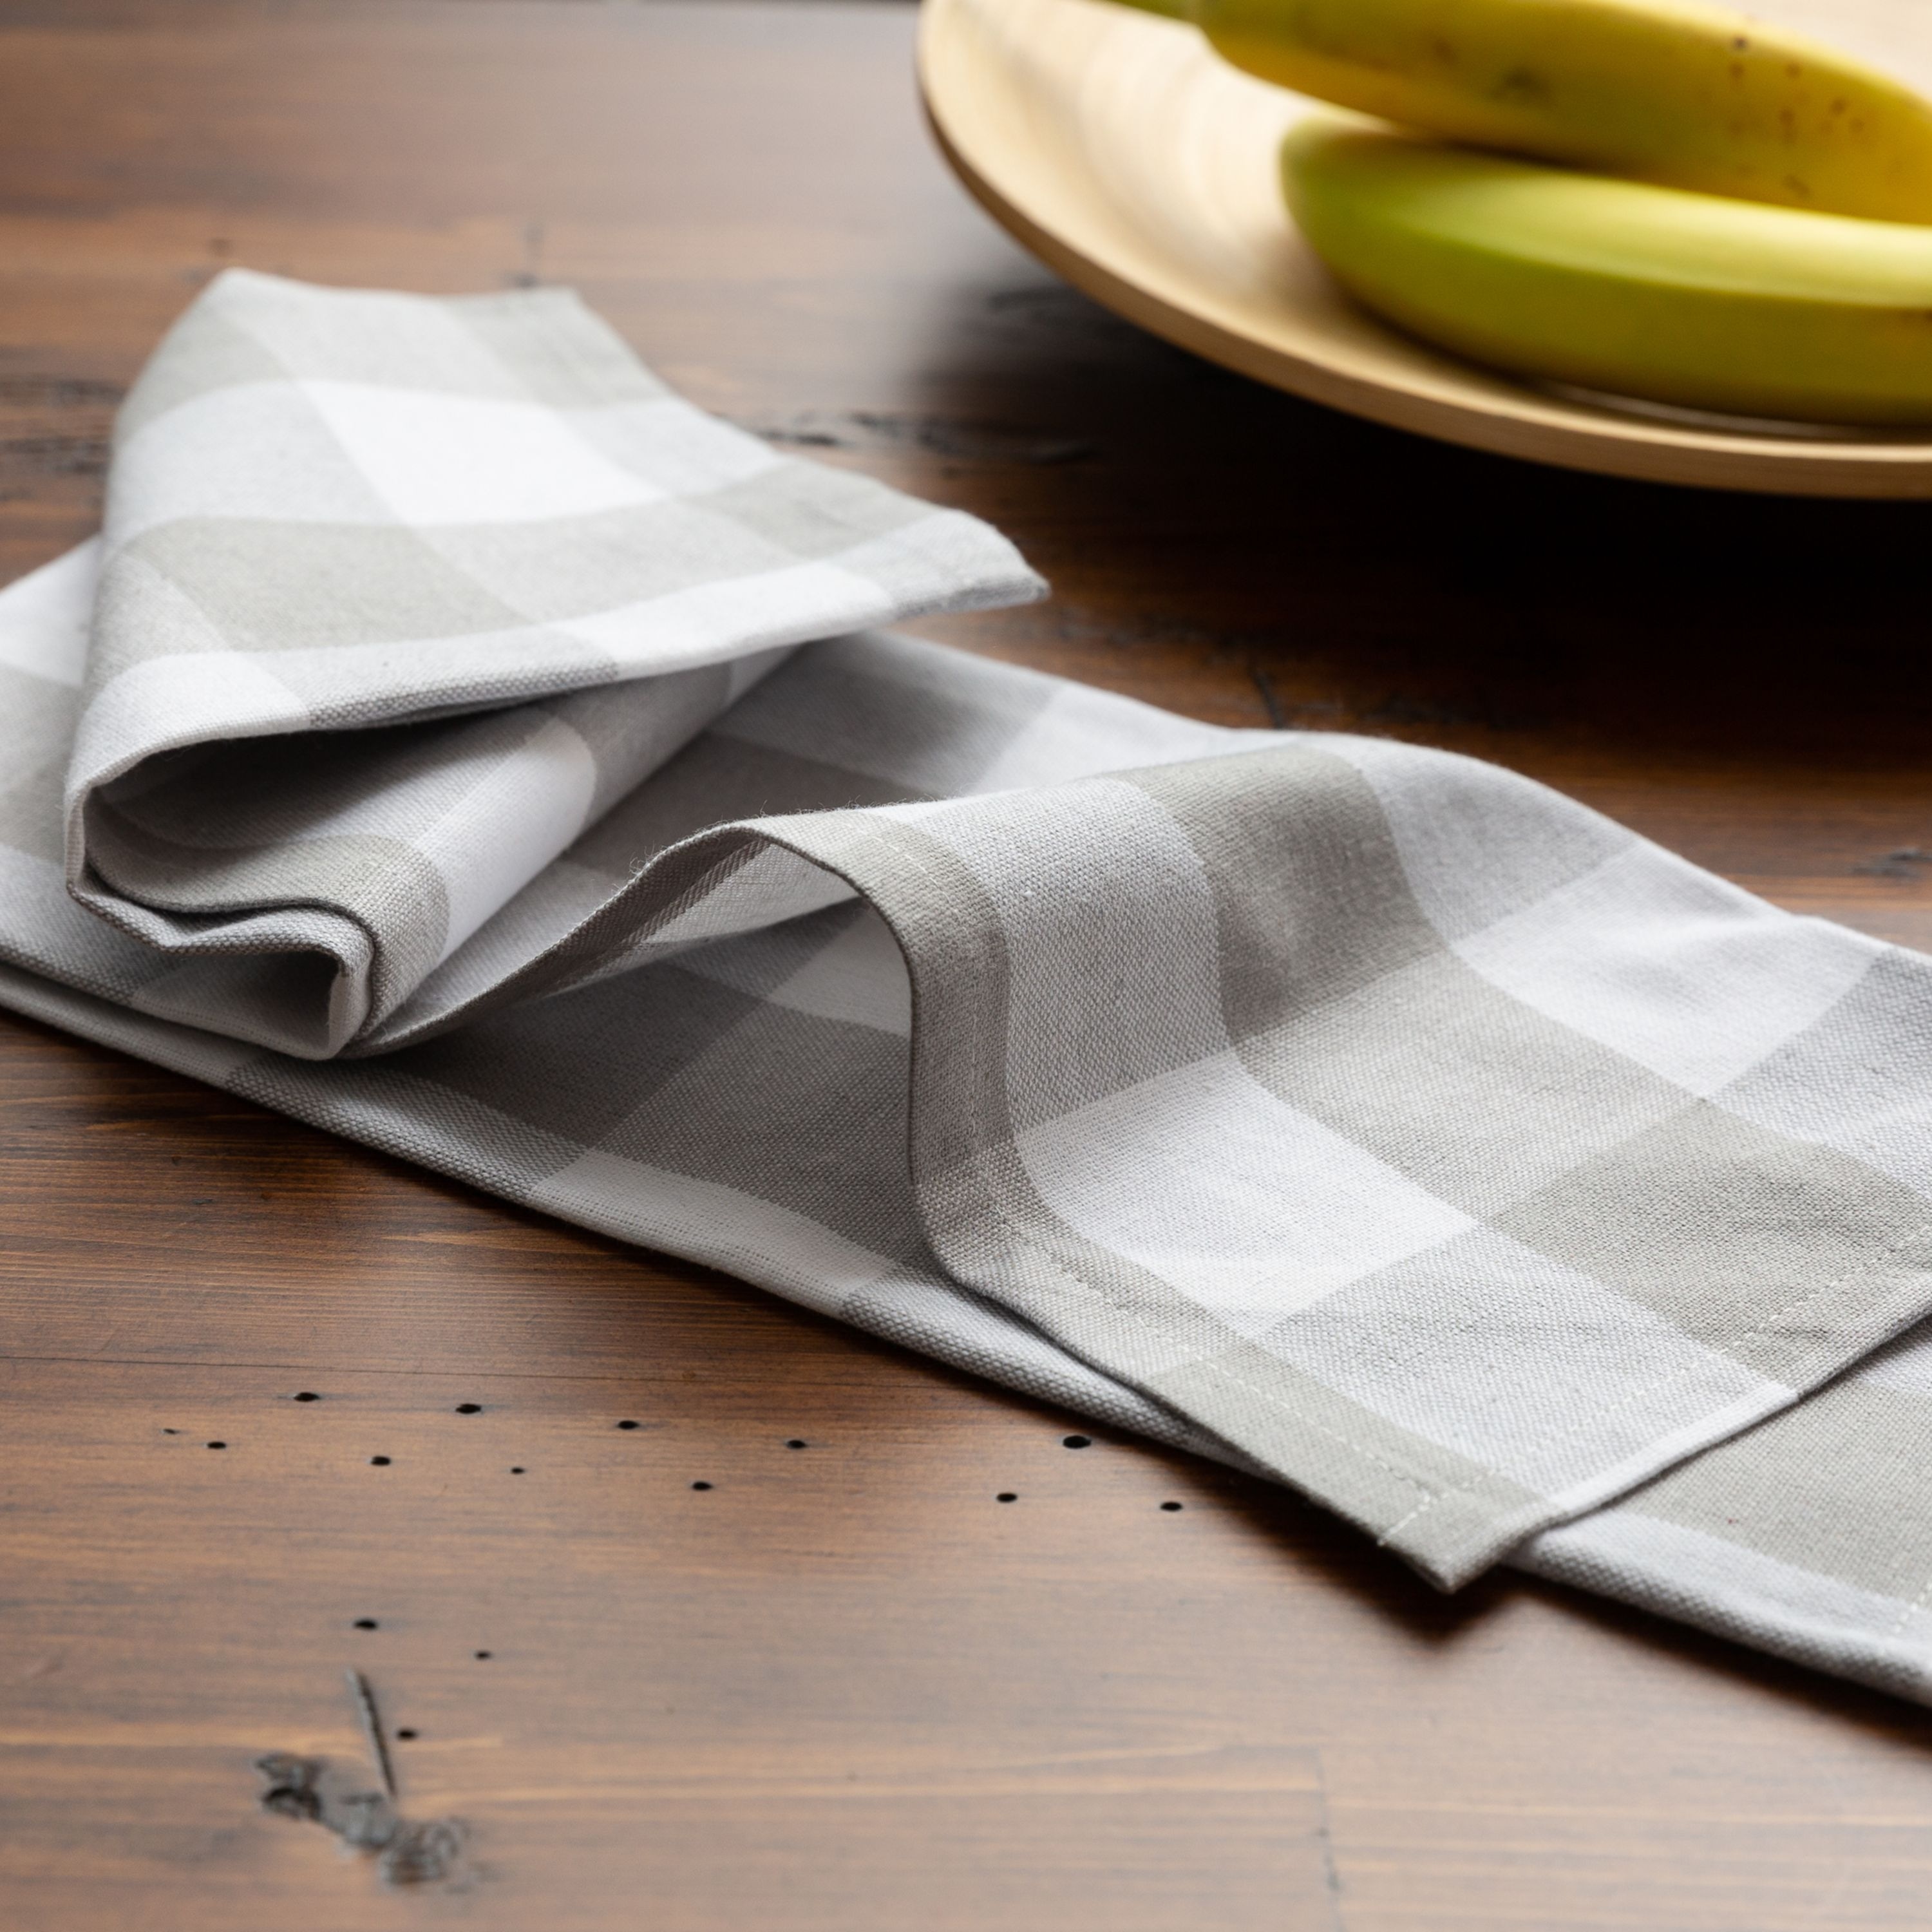 https://ak1.ostkcdn.com/images/products/is/images/direct/d447e834652163e795d06f994e9e3dea02899e46/Fabstyles-Country-Check-Cotton-Kitchen-Towel-Set-of-4.jpg